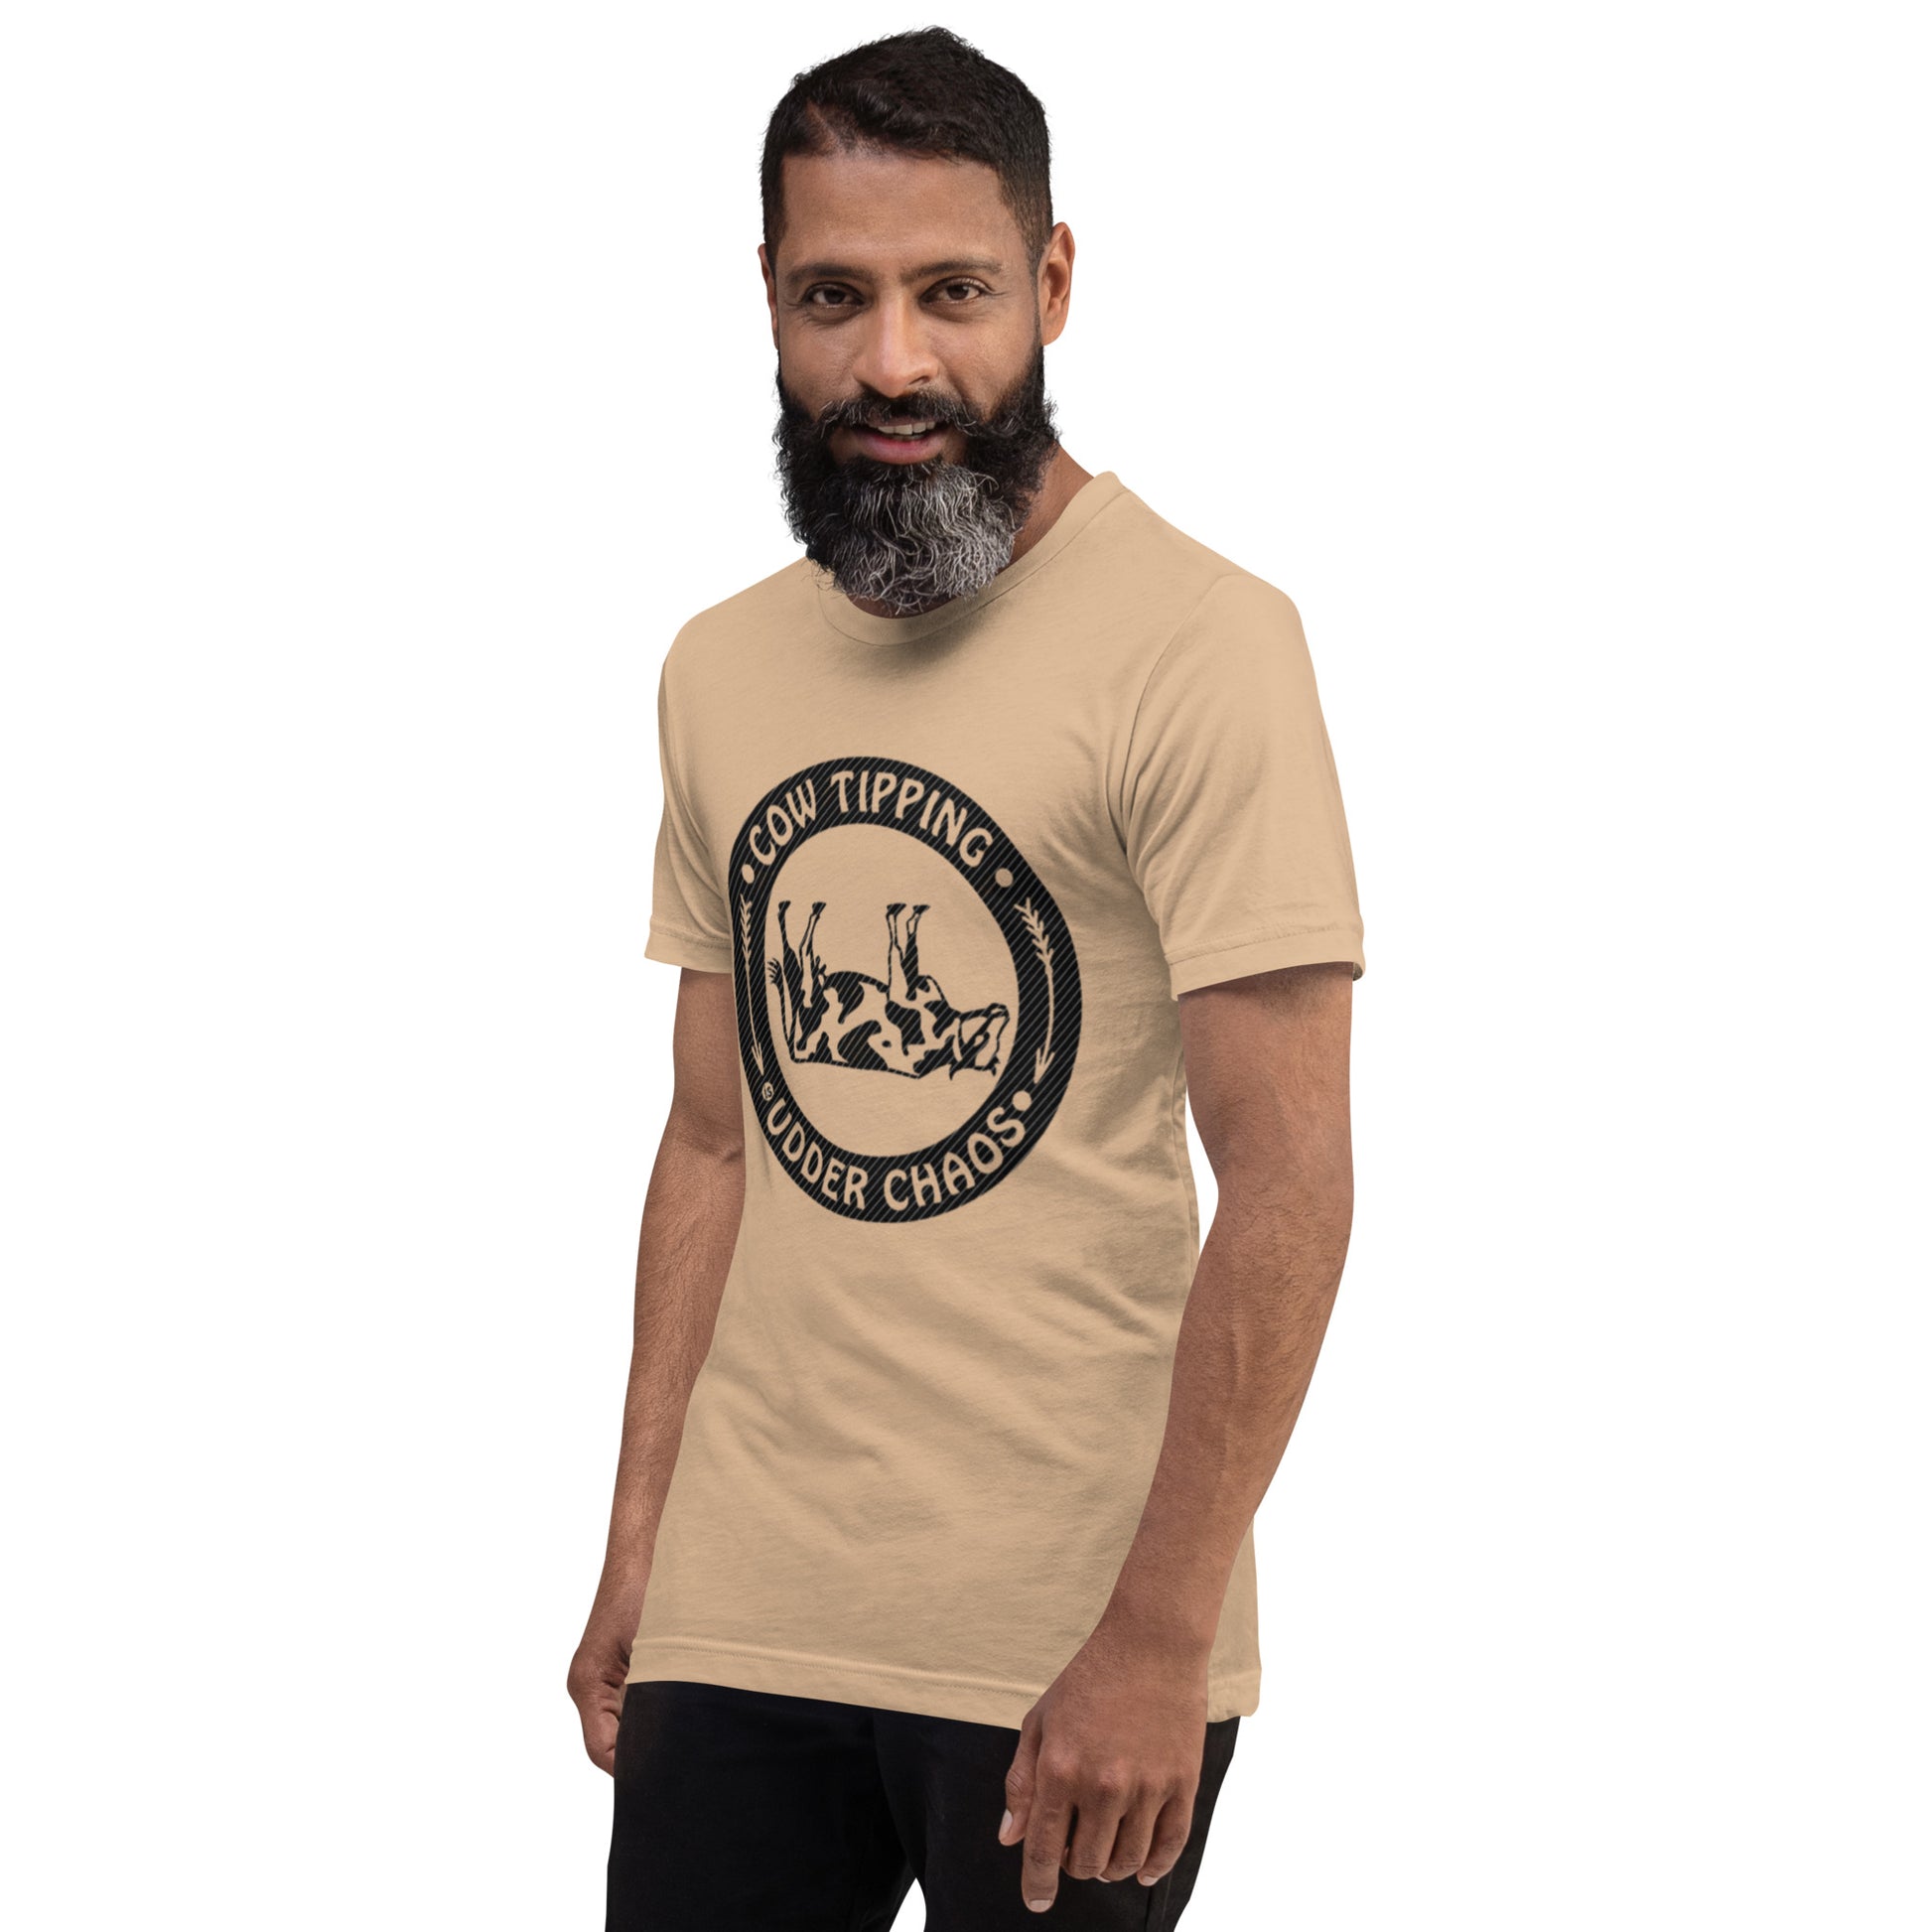 Udder Chaos - Classic Country Tees